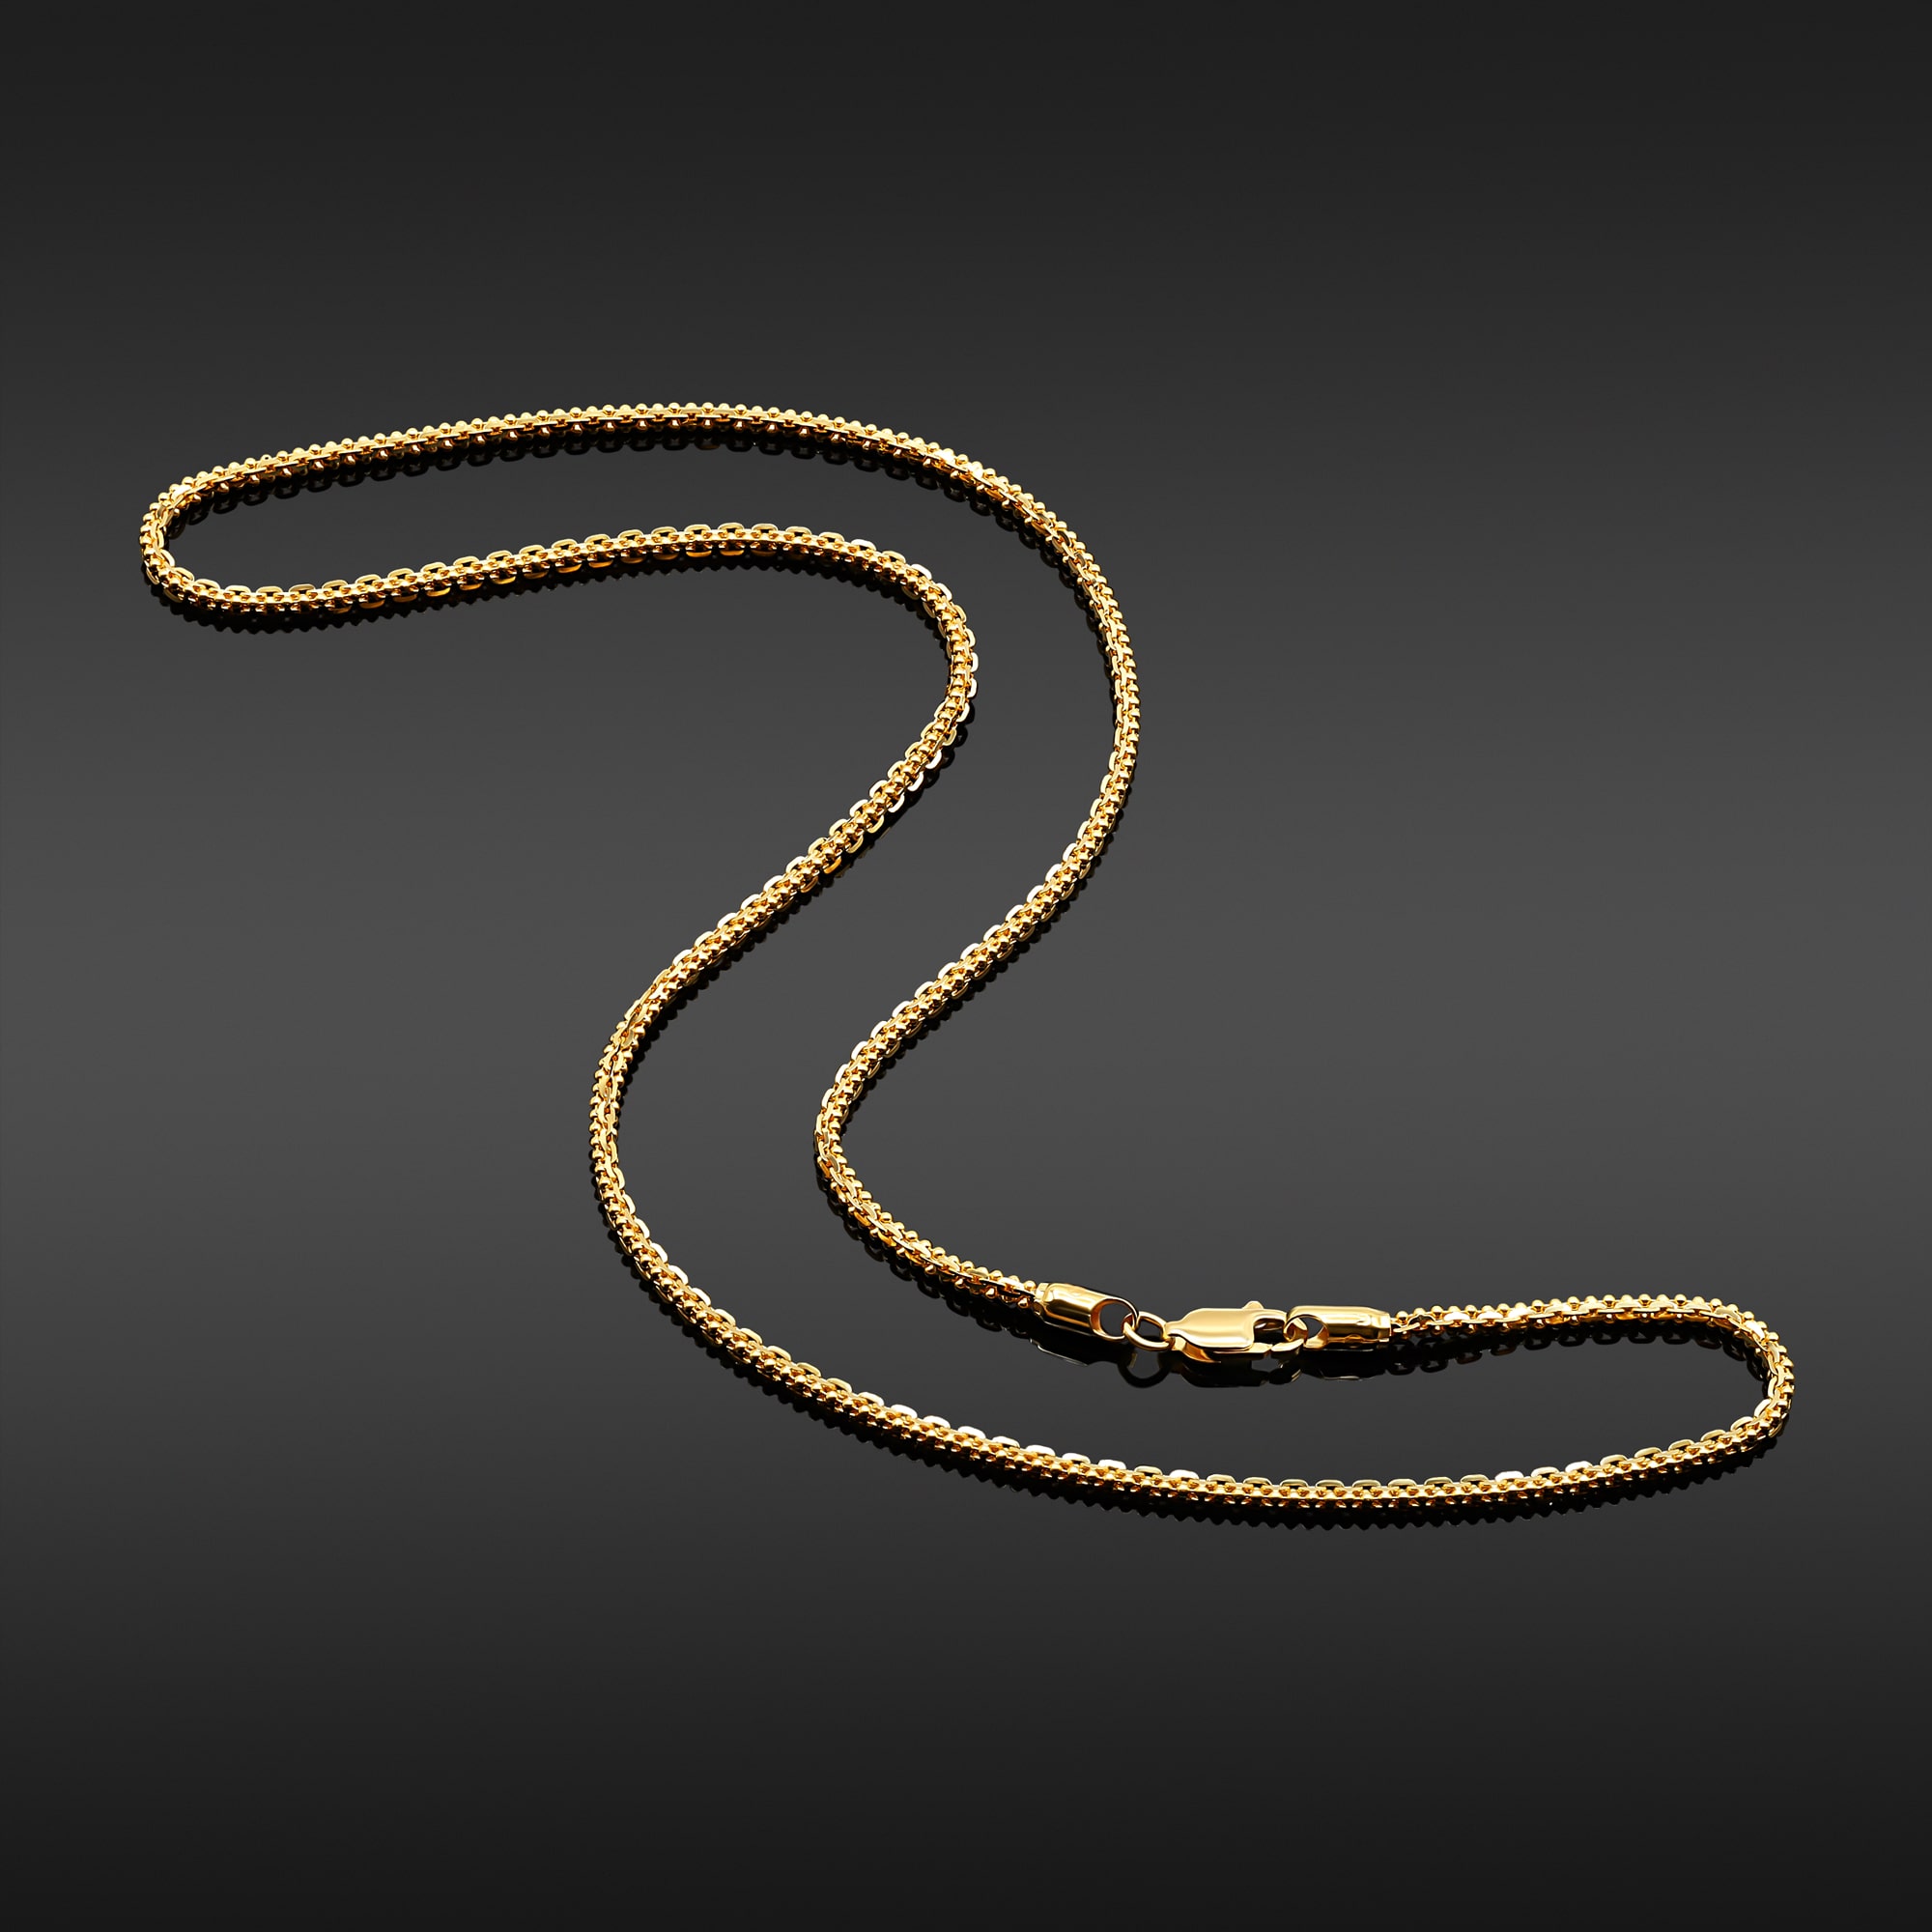 22K Gold Ball Link Chain – 20 Inch